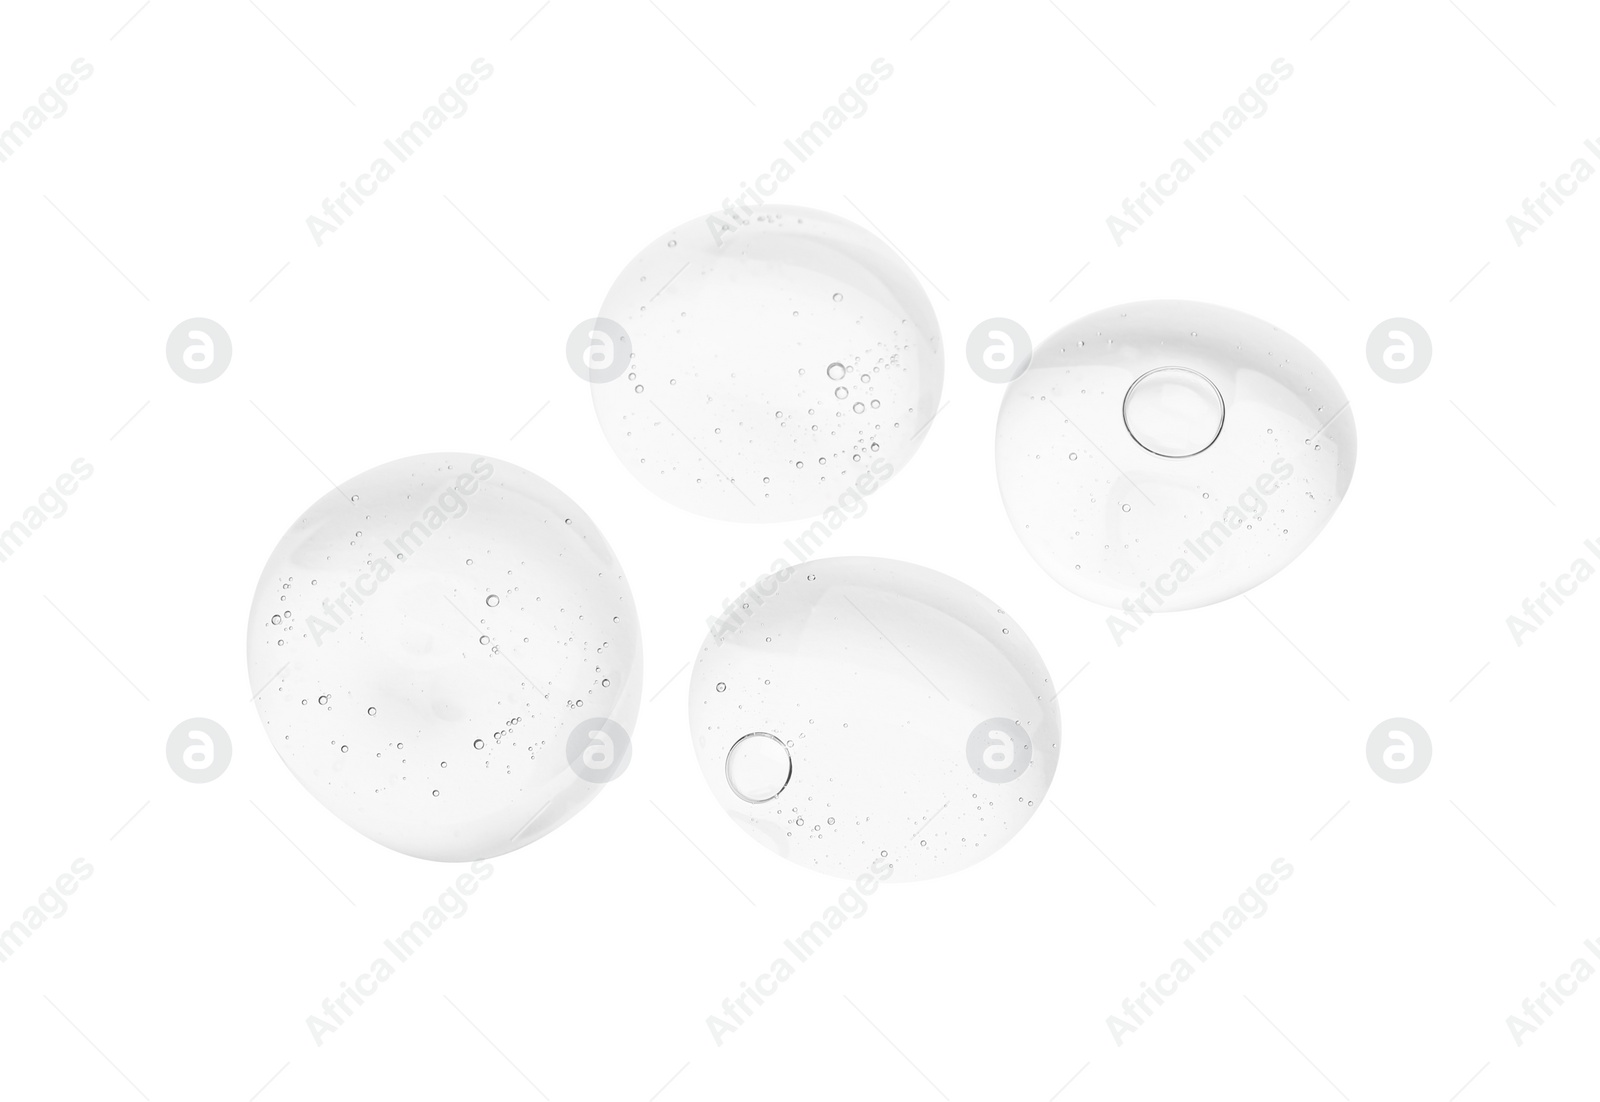 Photo of Drops of cosmetic oil on reflective surface, top view